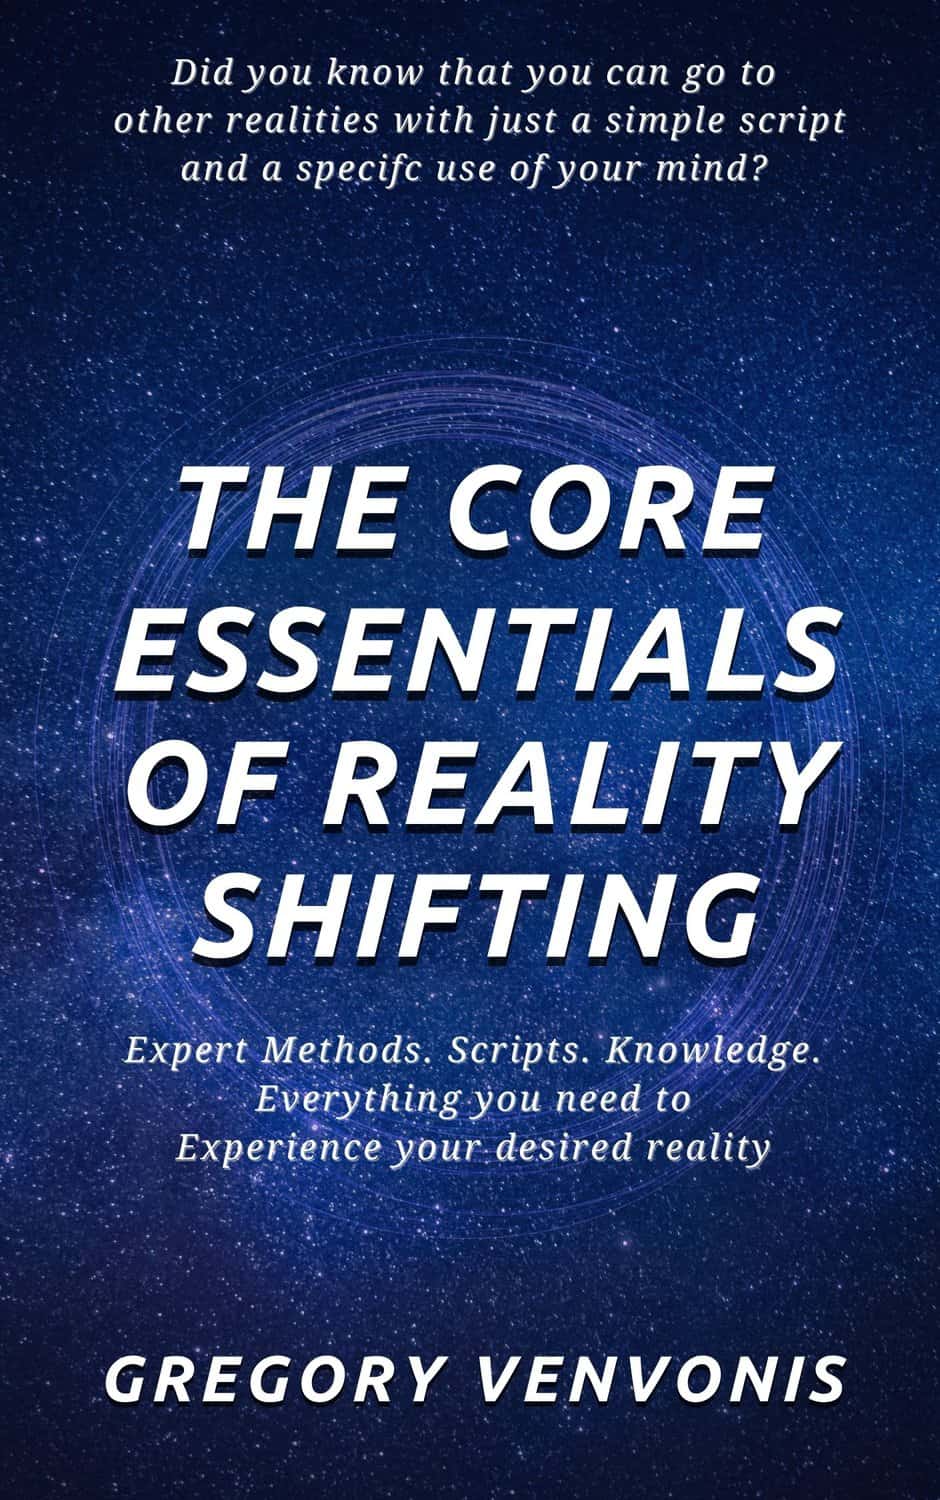 https://vowlenu.com/wp-content/uploads/2022/08/The-Core-Essentials-of-Reality-Shifting-Cover-Finished.jpg